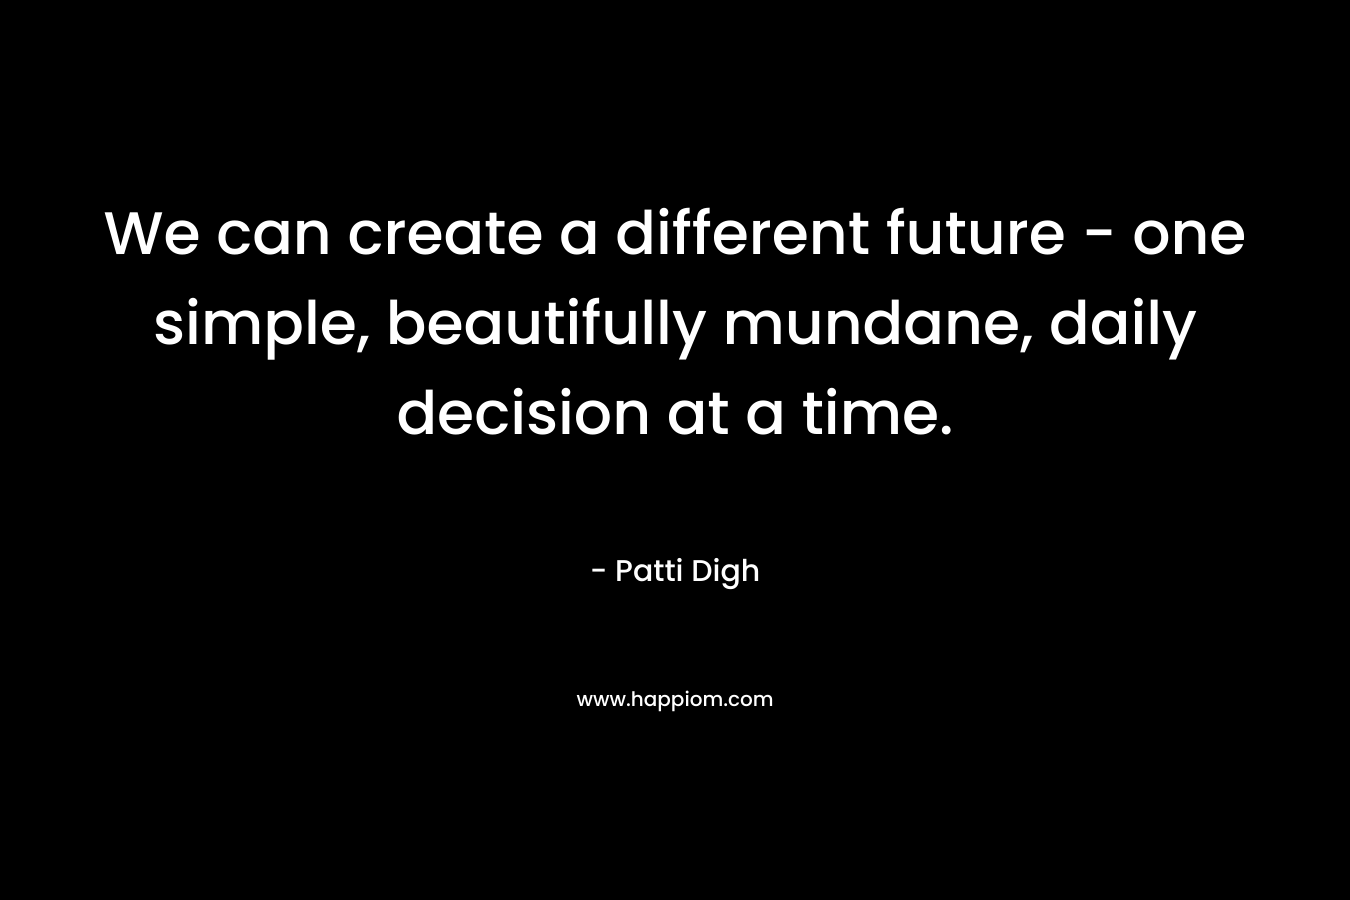 We can create a different future - one simple, beautifully mundane, daily decision at a time.